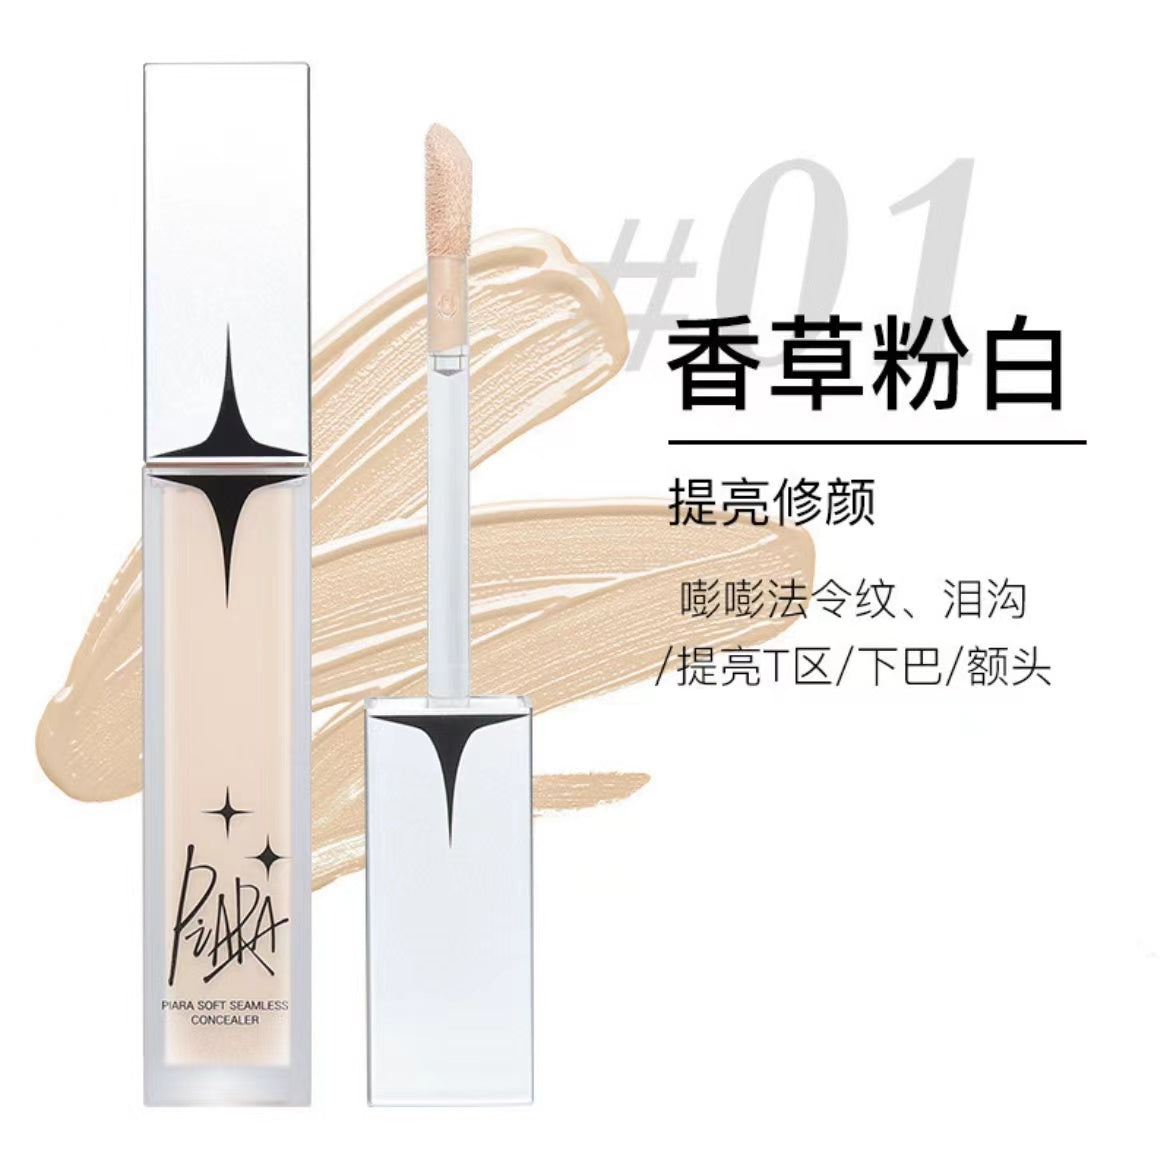 Piara Soft Seamless Concealer 10g 佩冉丝柔无痕遮瑕液